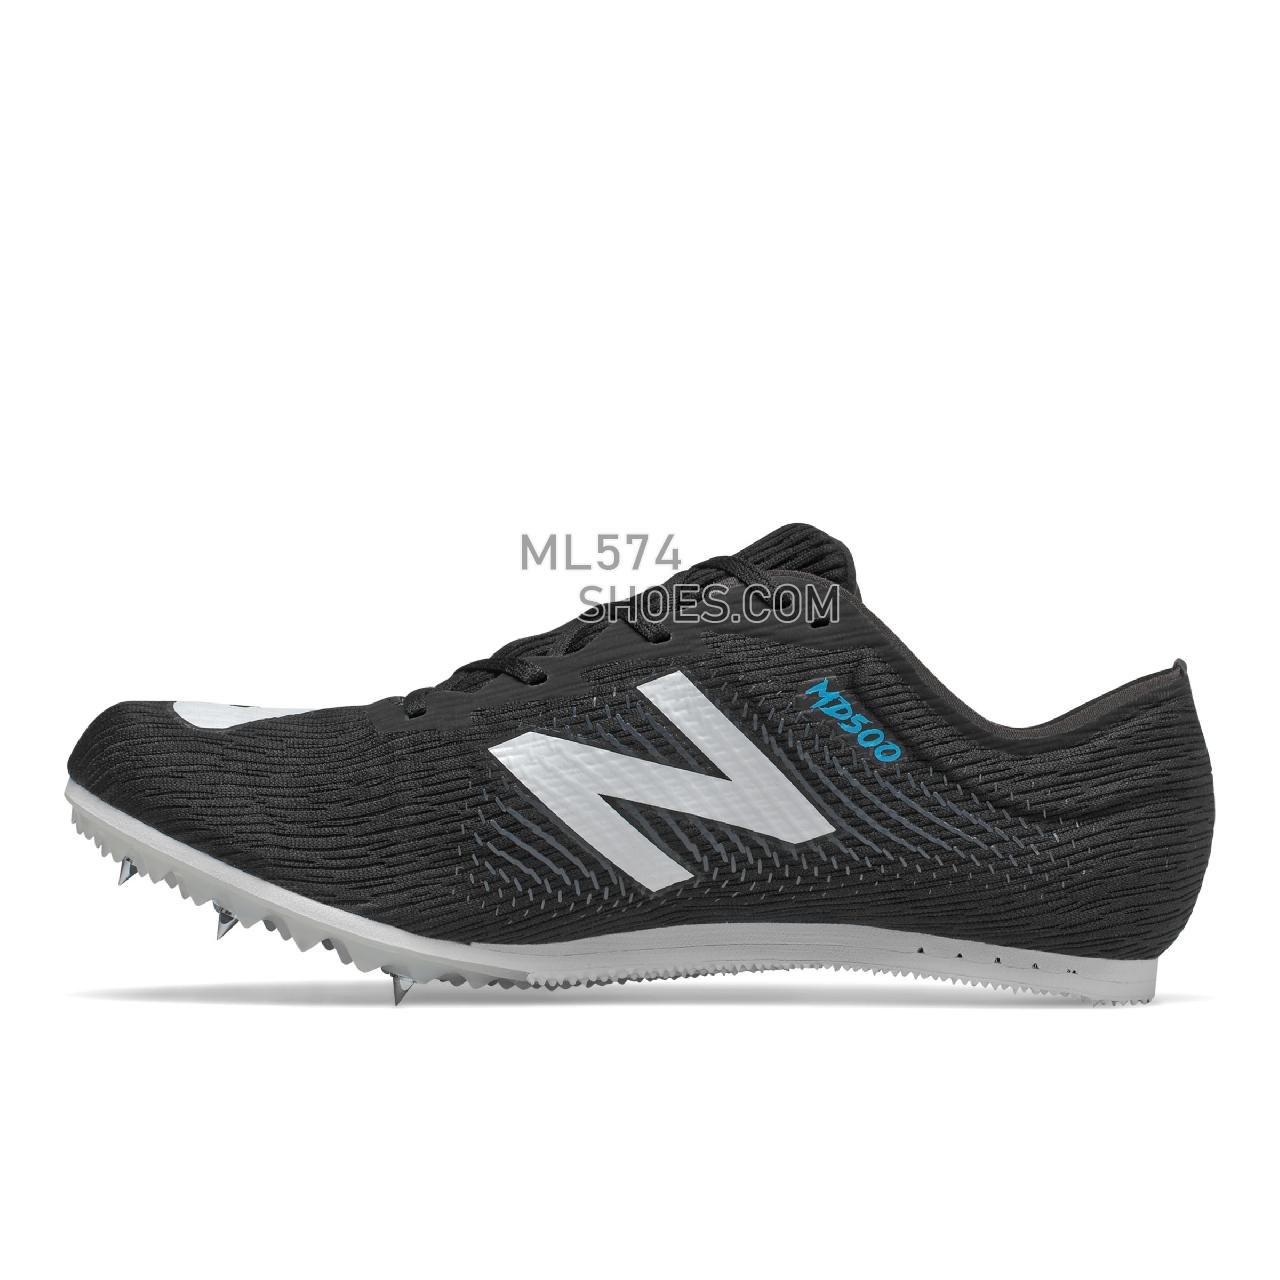 New Balance MD500v7 - Men's Competition Running - Black with White - MMD500X7